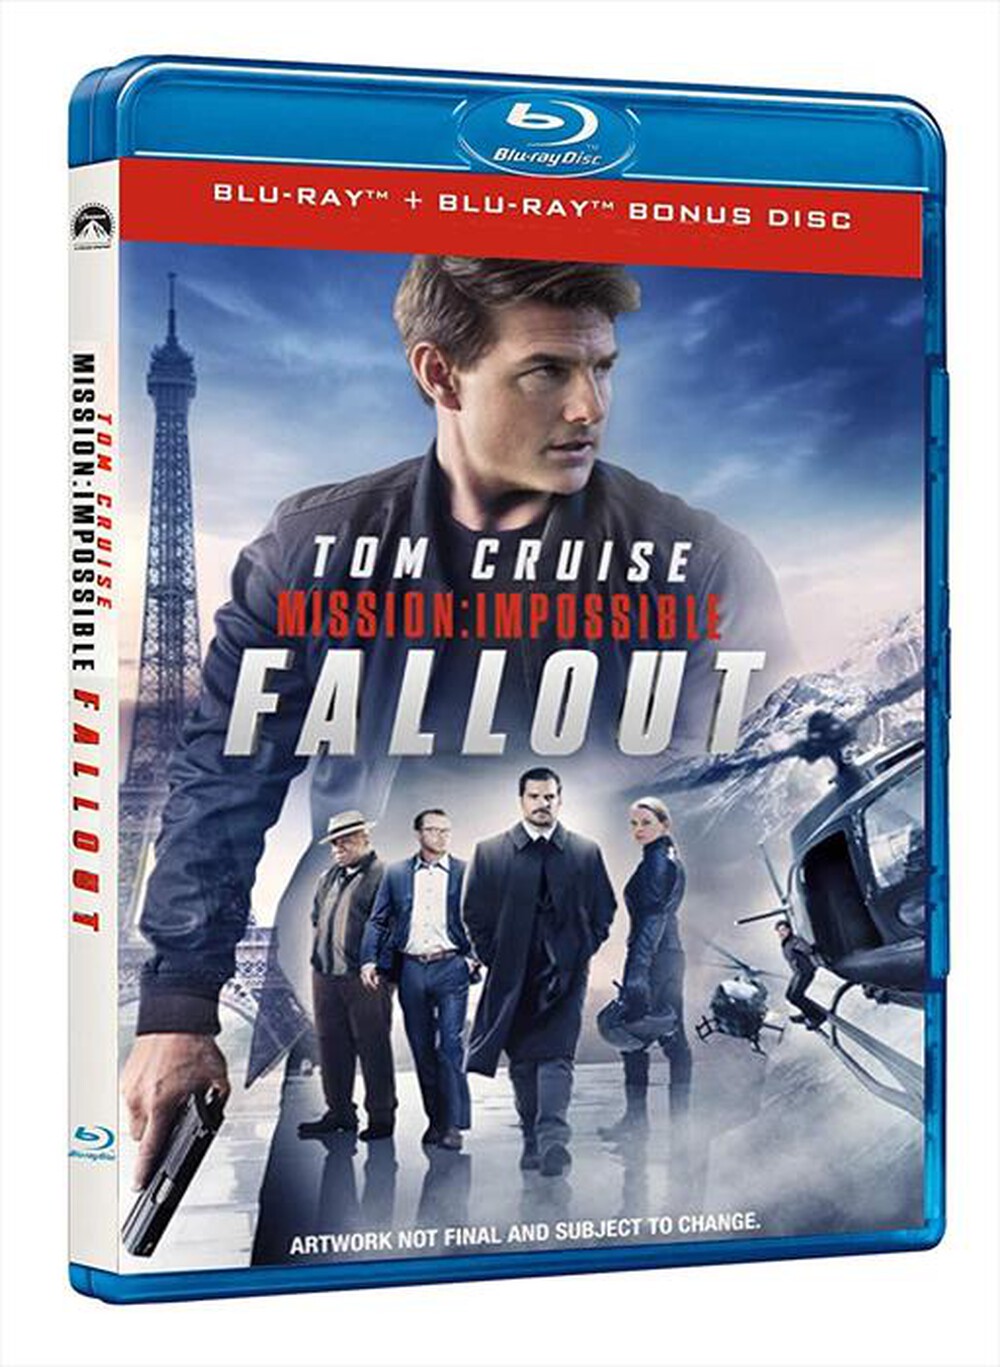 "UNIVERSAL PICTURES - Mission Impossible - Fallout"